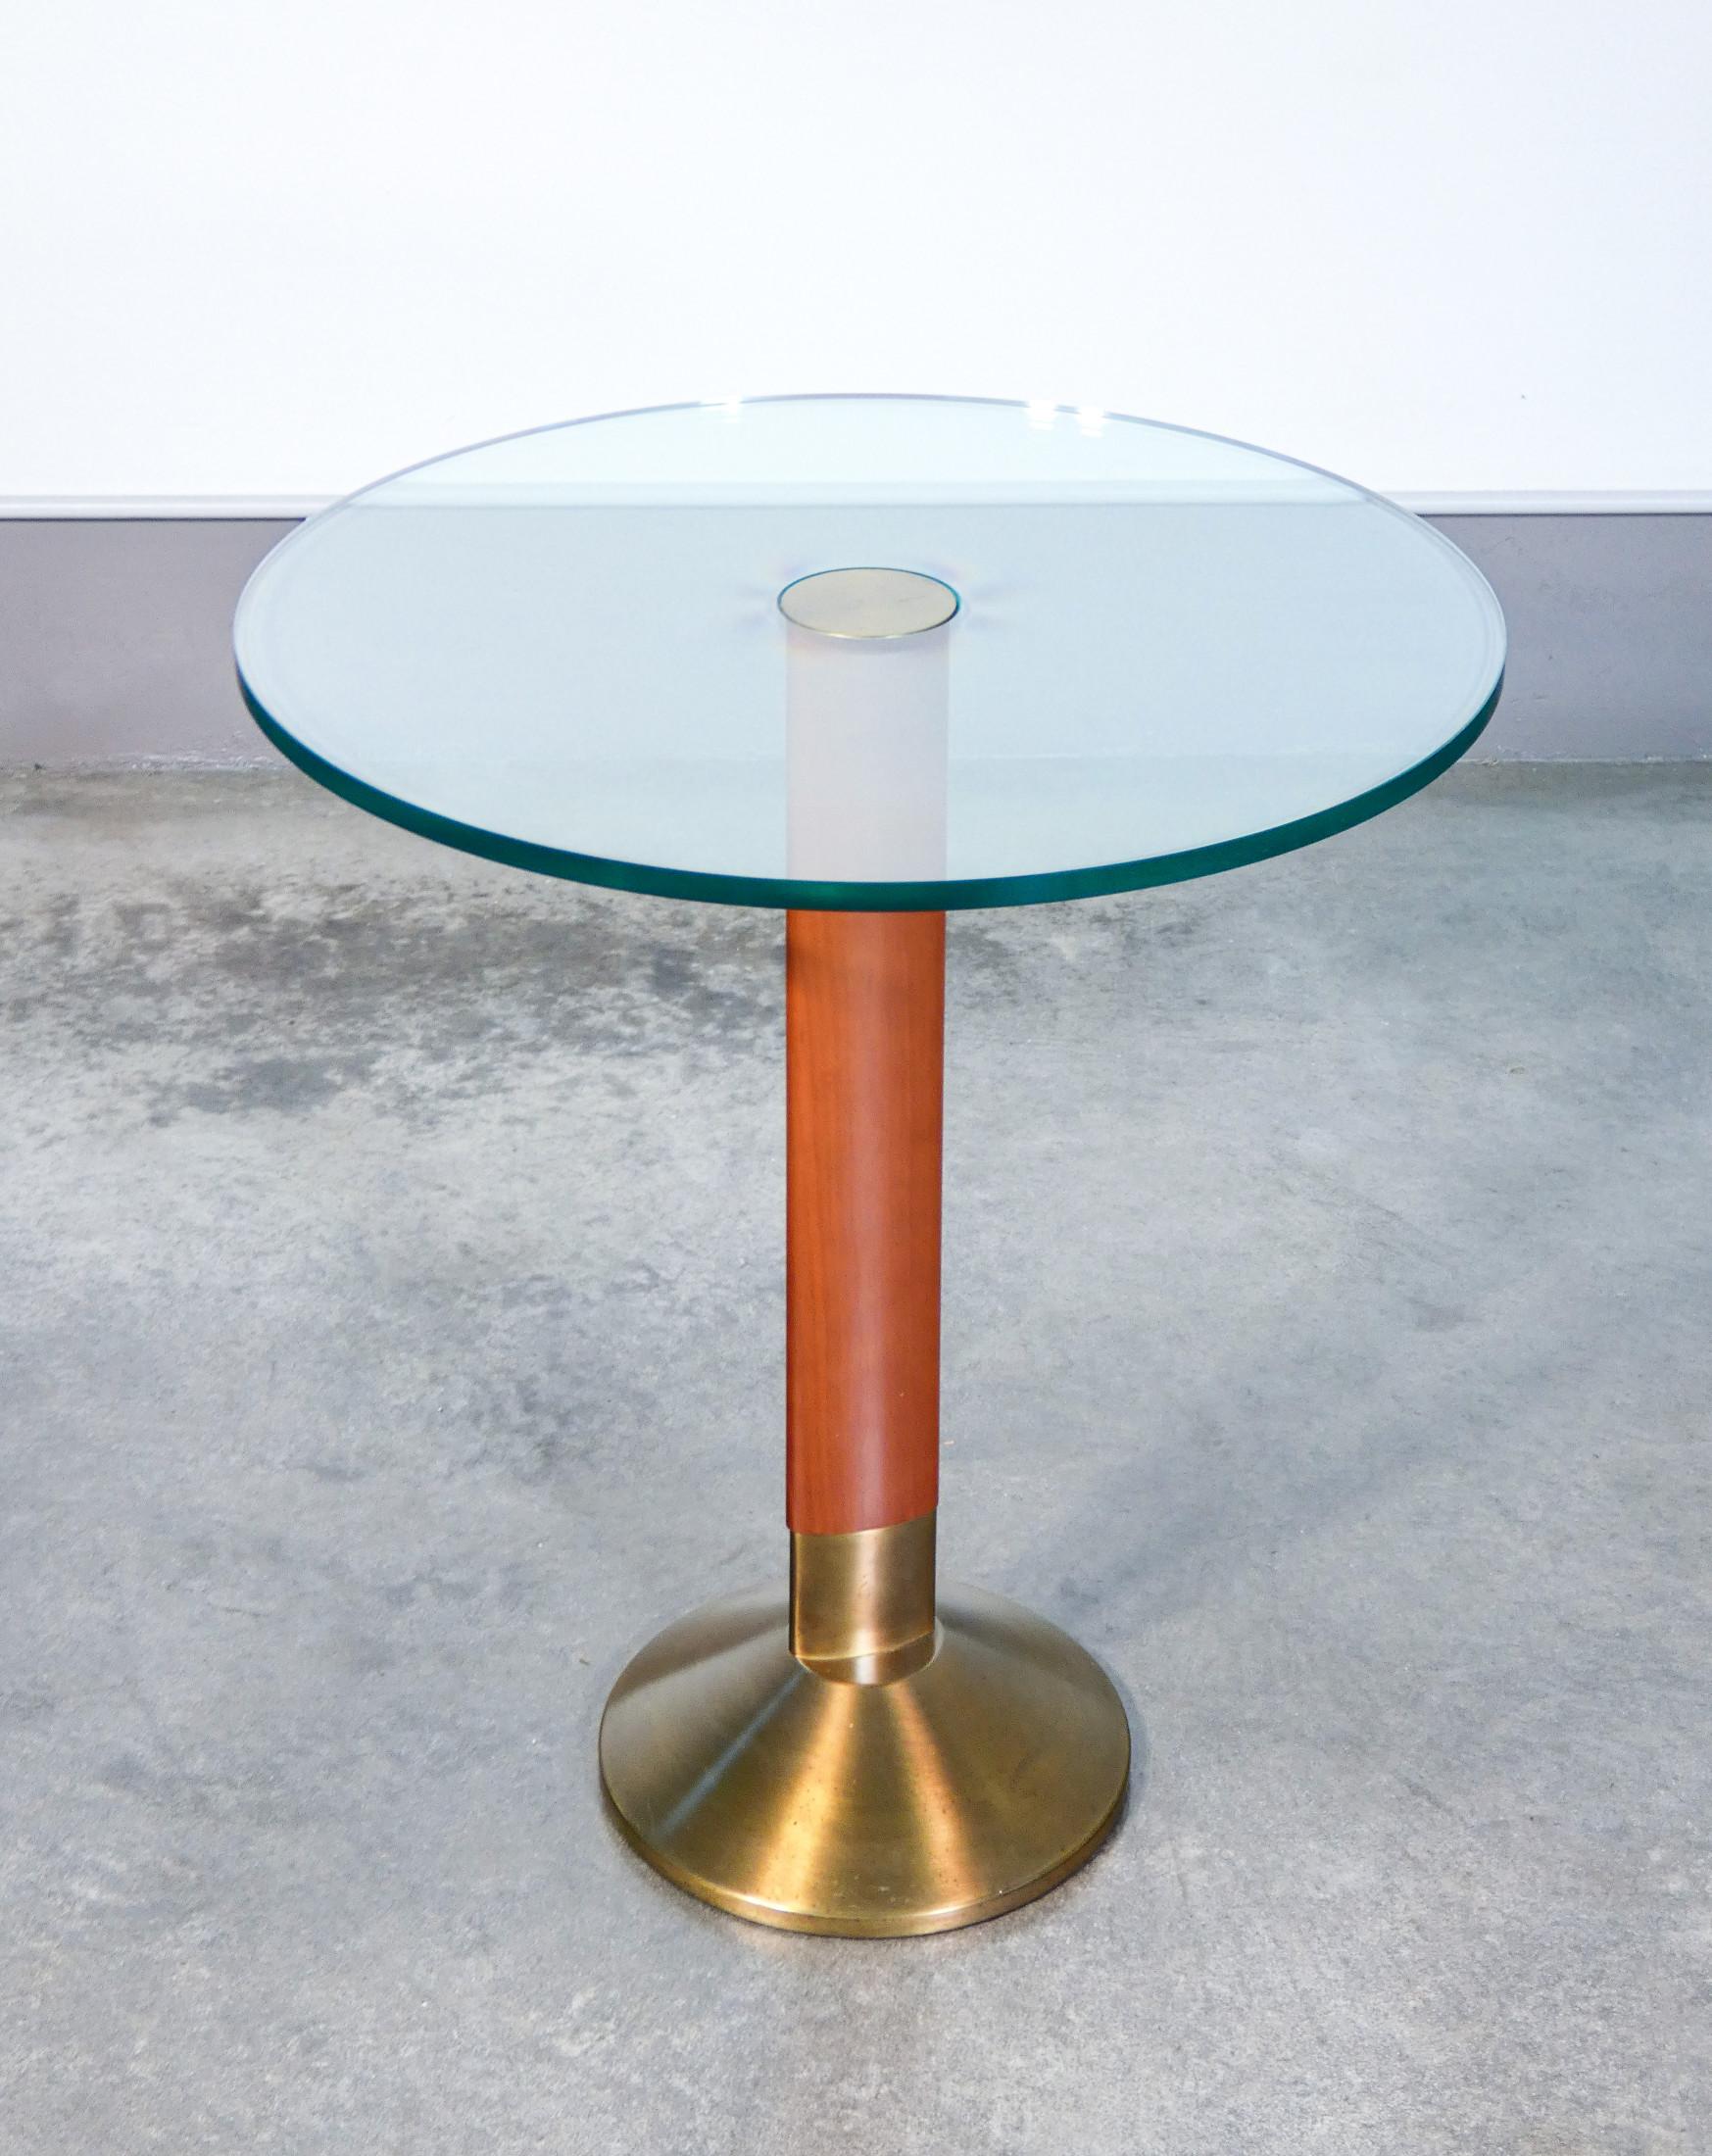 Italian Table with Round Top Design by Daniela Puppa for Fontana Arte, Italy, 80s For Sale